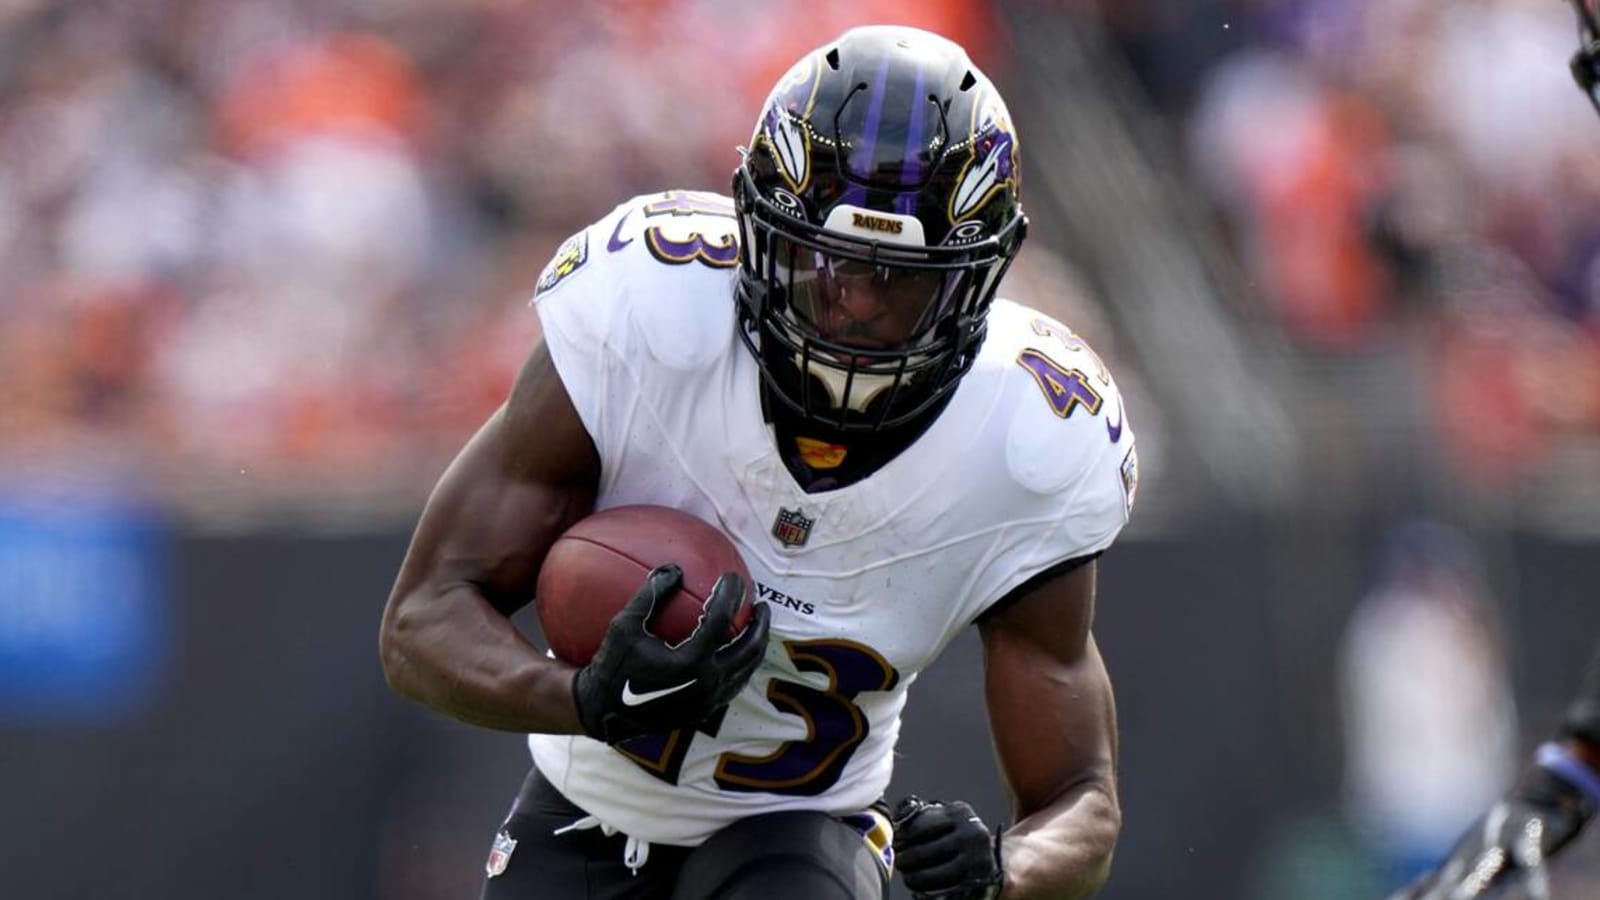 Ravens get good news on RB amid rash of offensive injuries